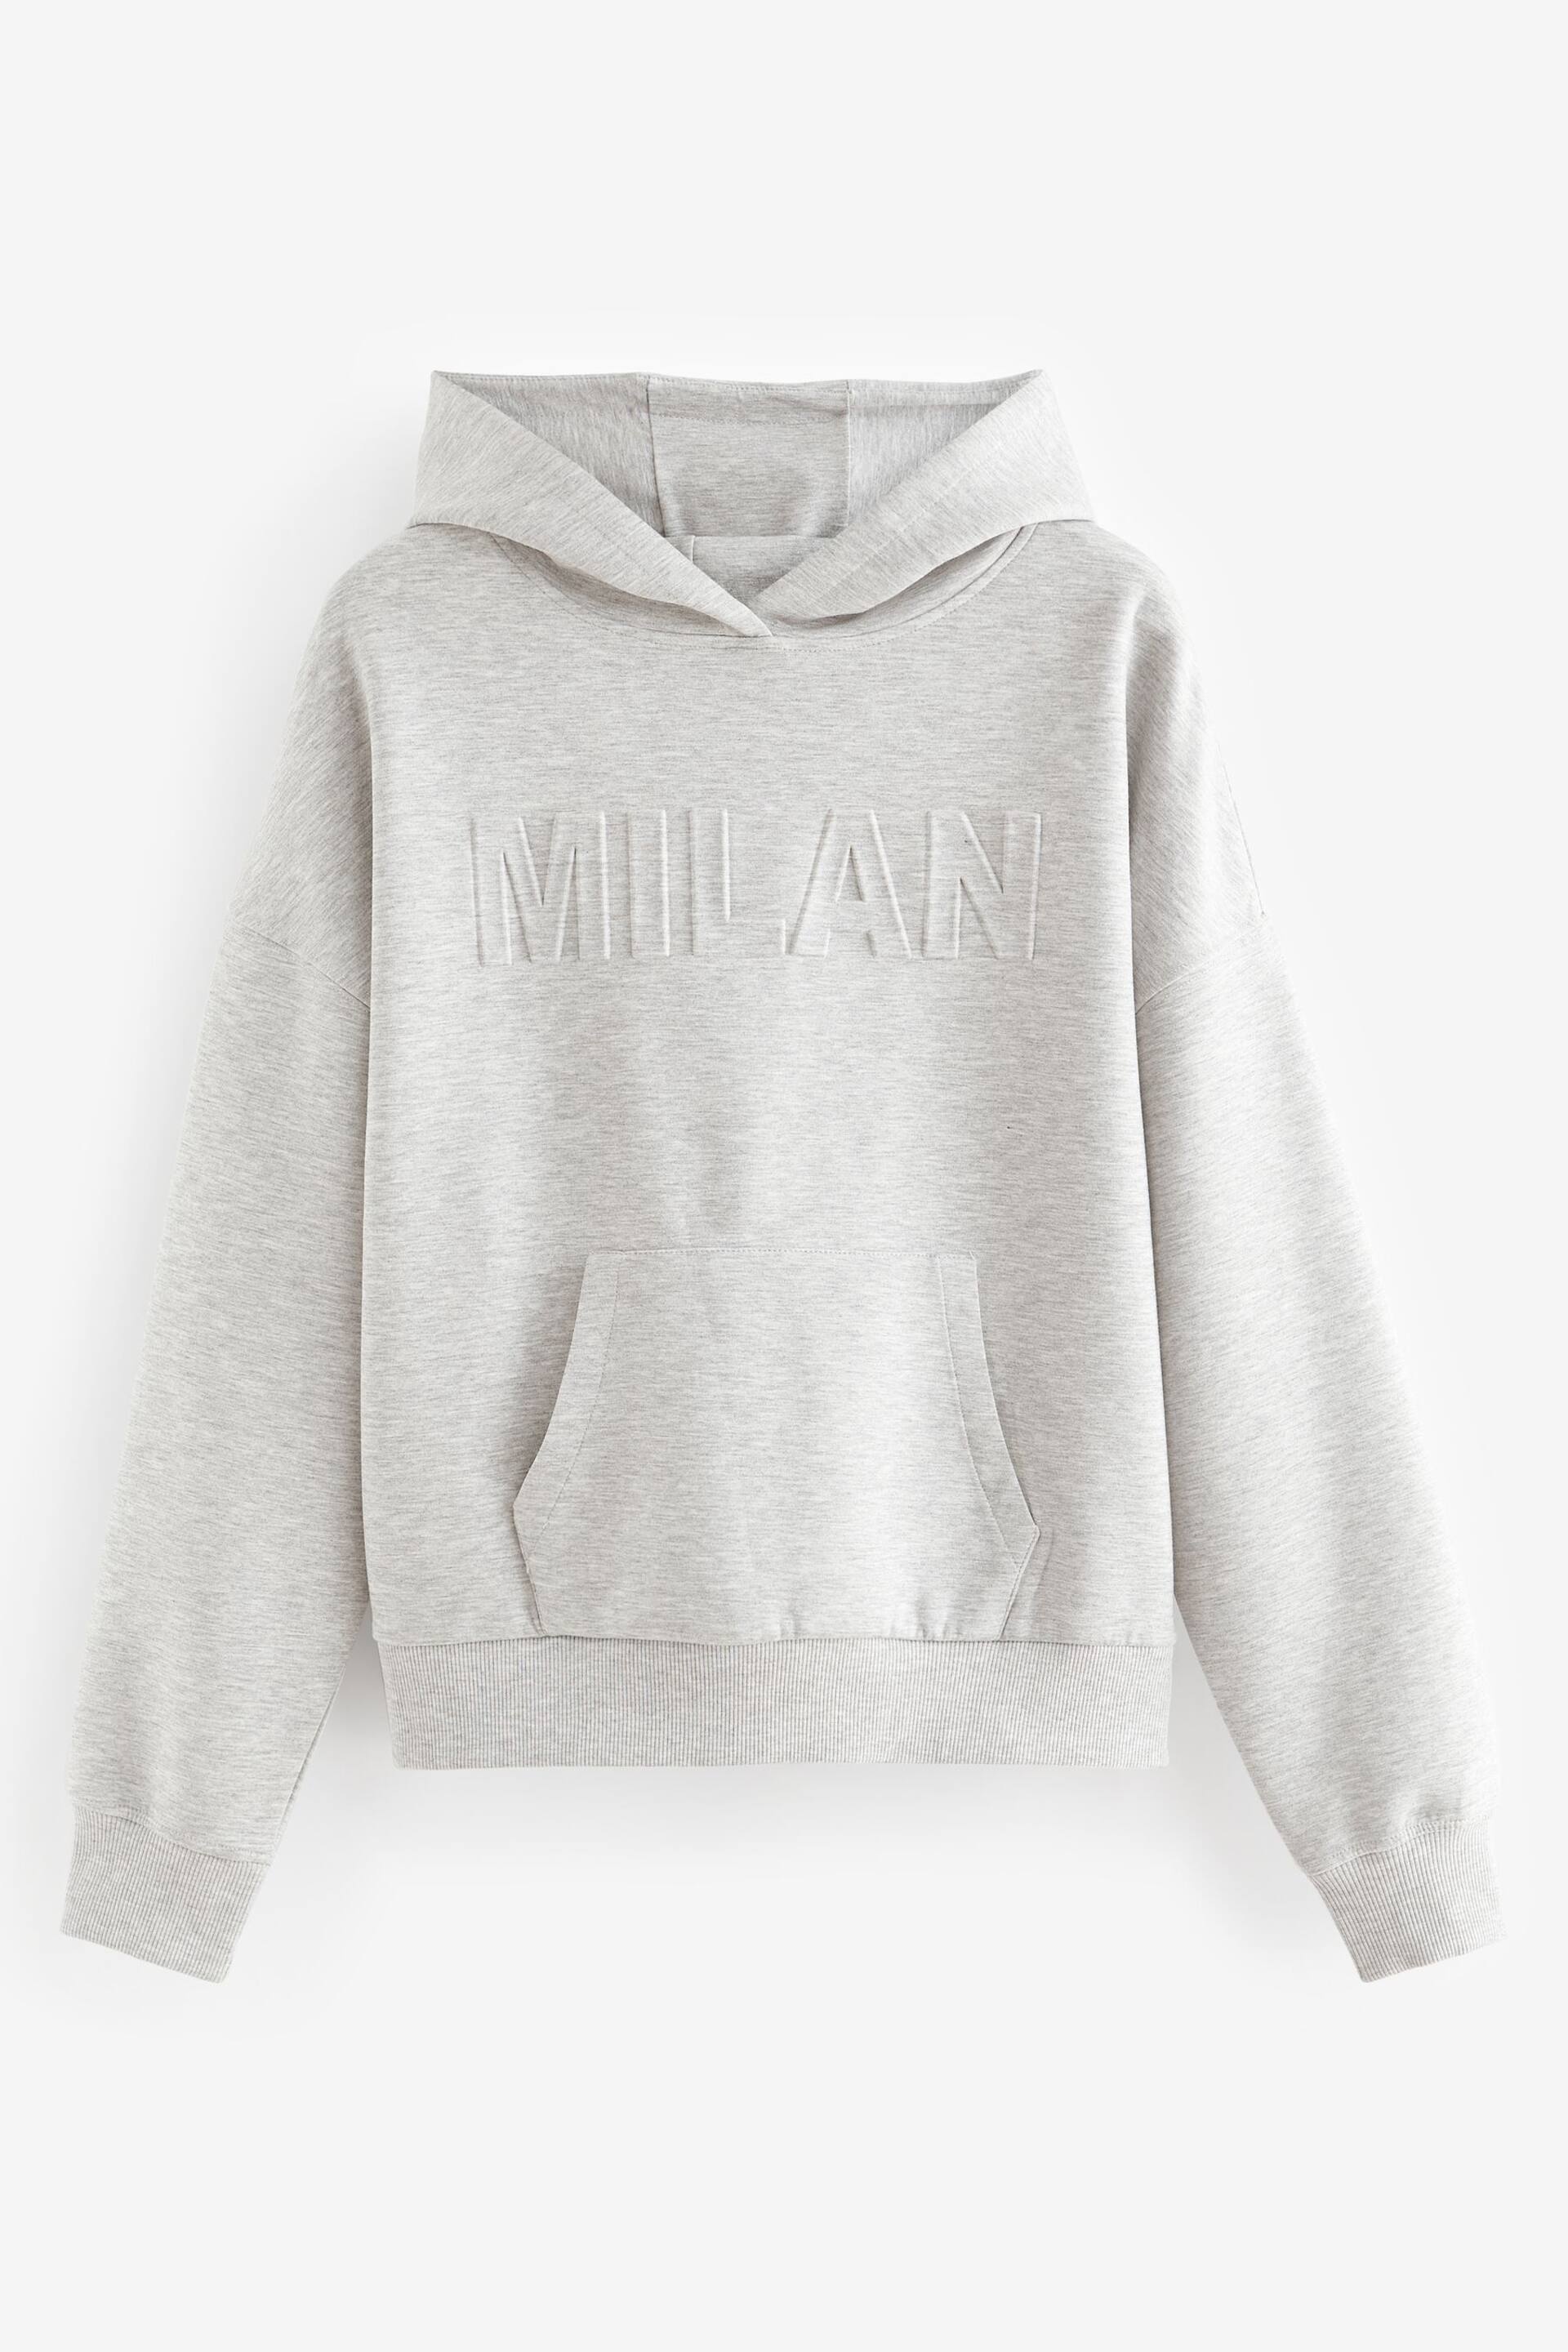 Grey Marl Slinky Soft Touch Plush Embossed Milan City Graphic Slogan Hoodie - Image 5 of 6